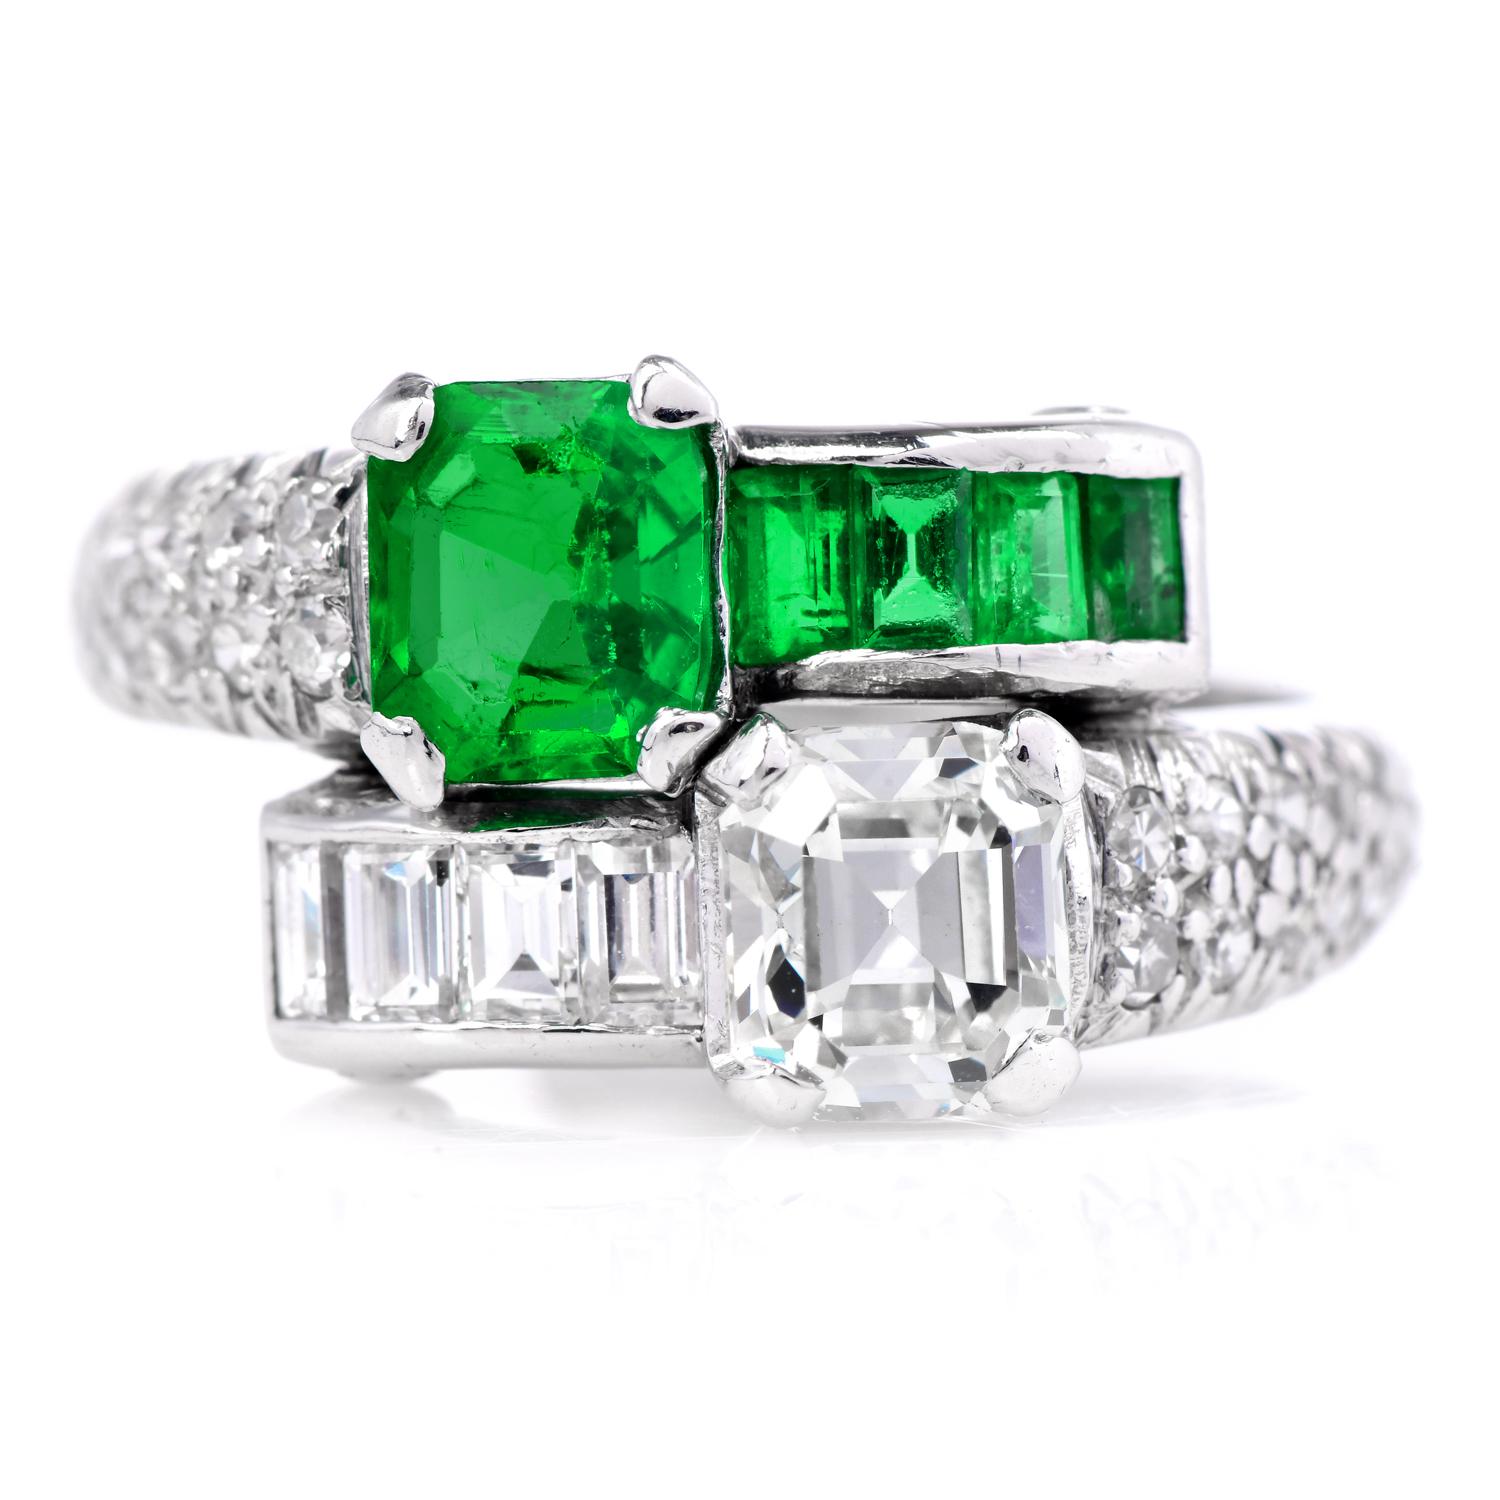 A very elegant Vintage Emerald and Diamond Bypass Engagement ring. Crafted in Platinum with Diamond and Emerald Accents on the band.
A beautiful Toi Et Moi-inspired Engagement ring.
The gorgeous Columbian Emerald in the center is certified by GIA